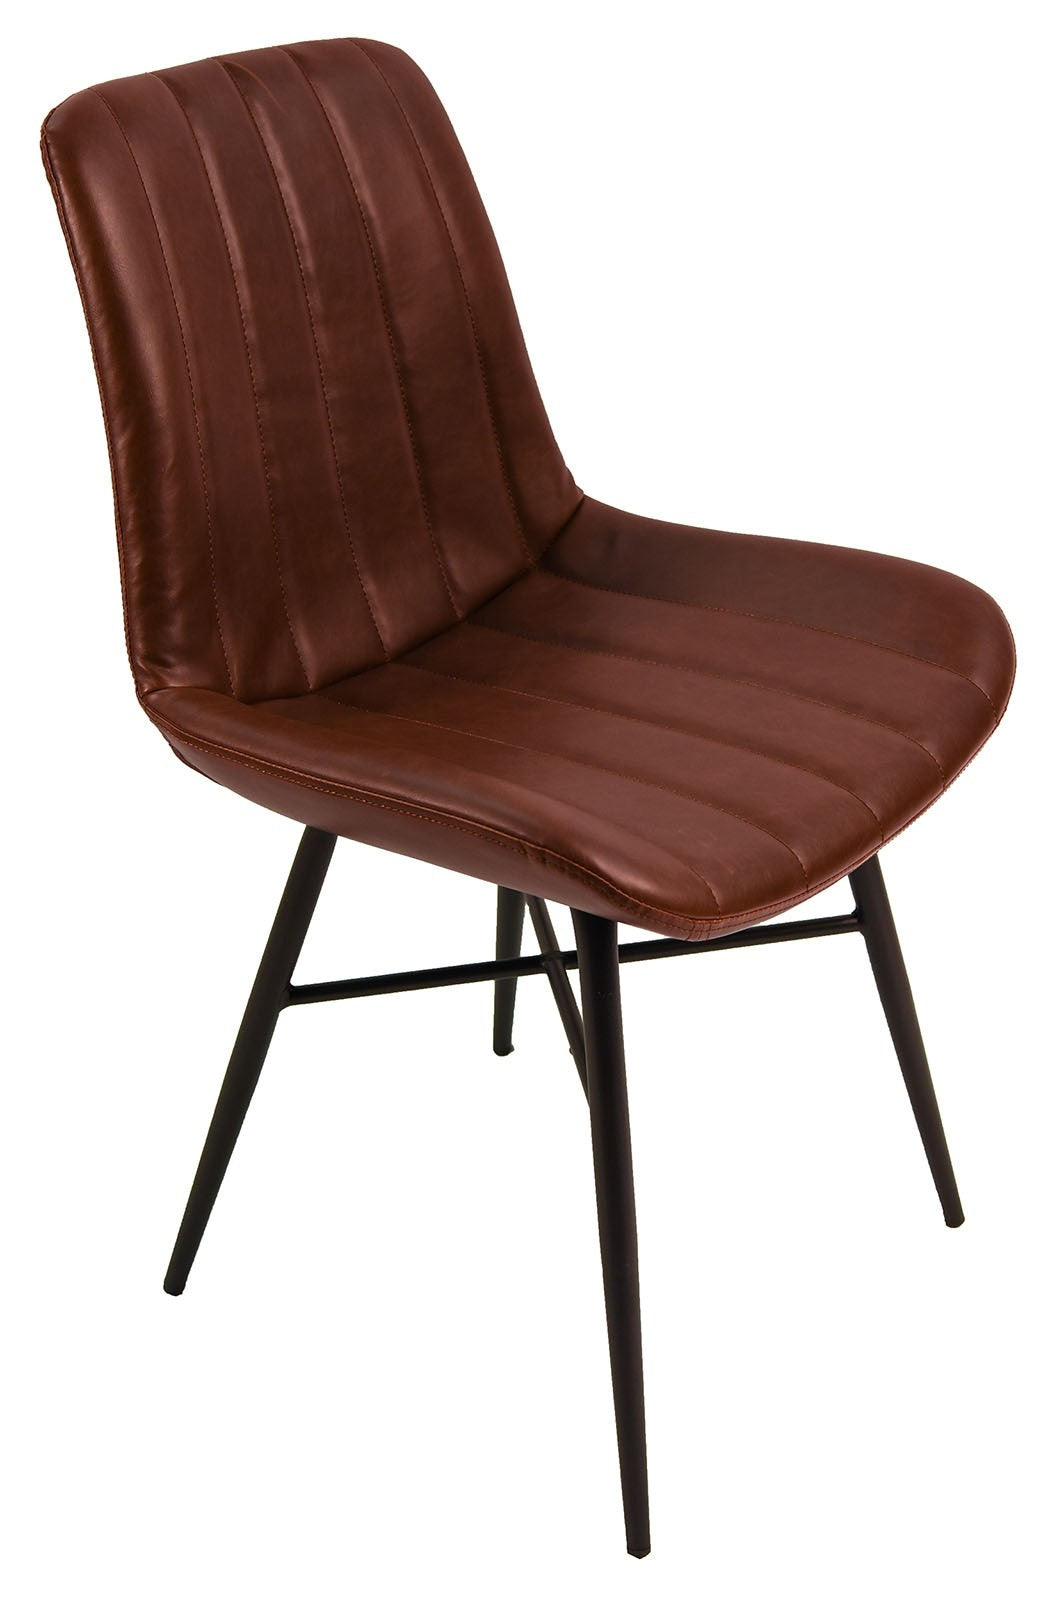 Croft Vintage Retro Brown Stitched Dining Chair